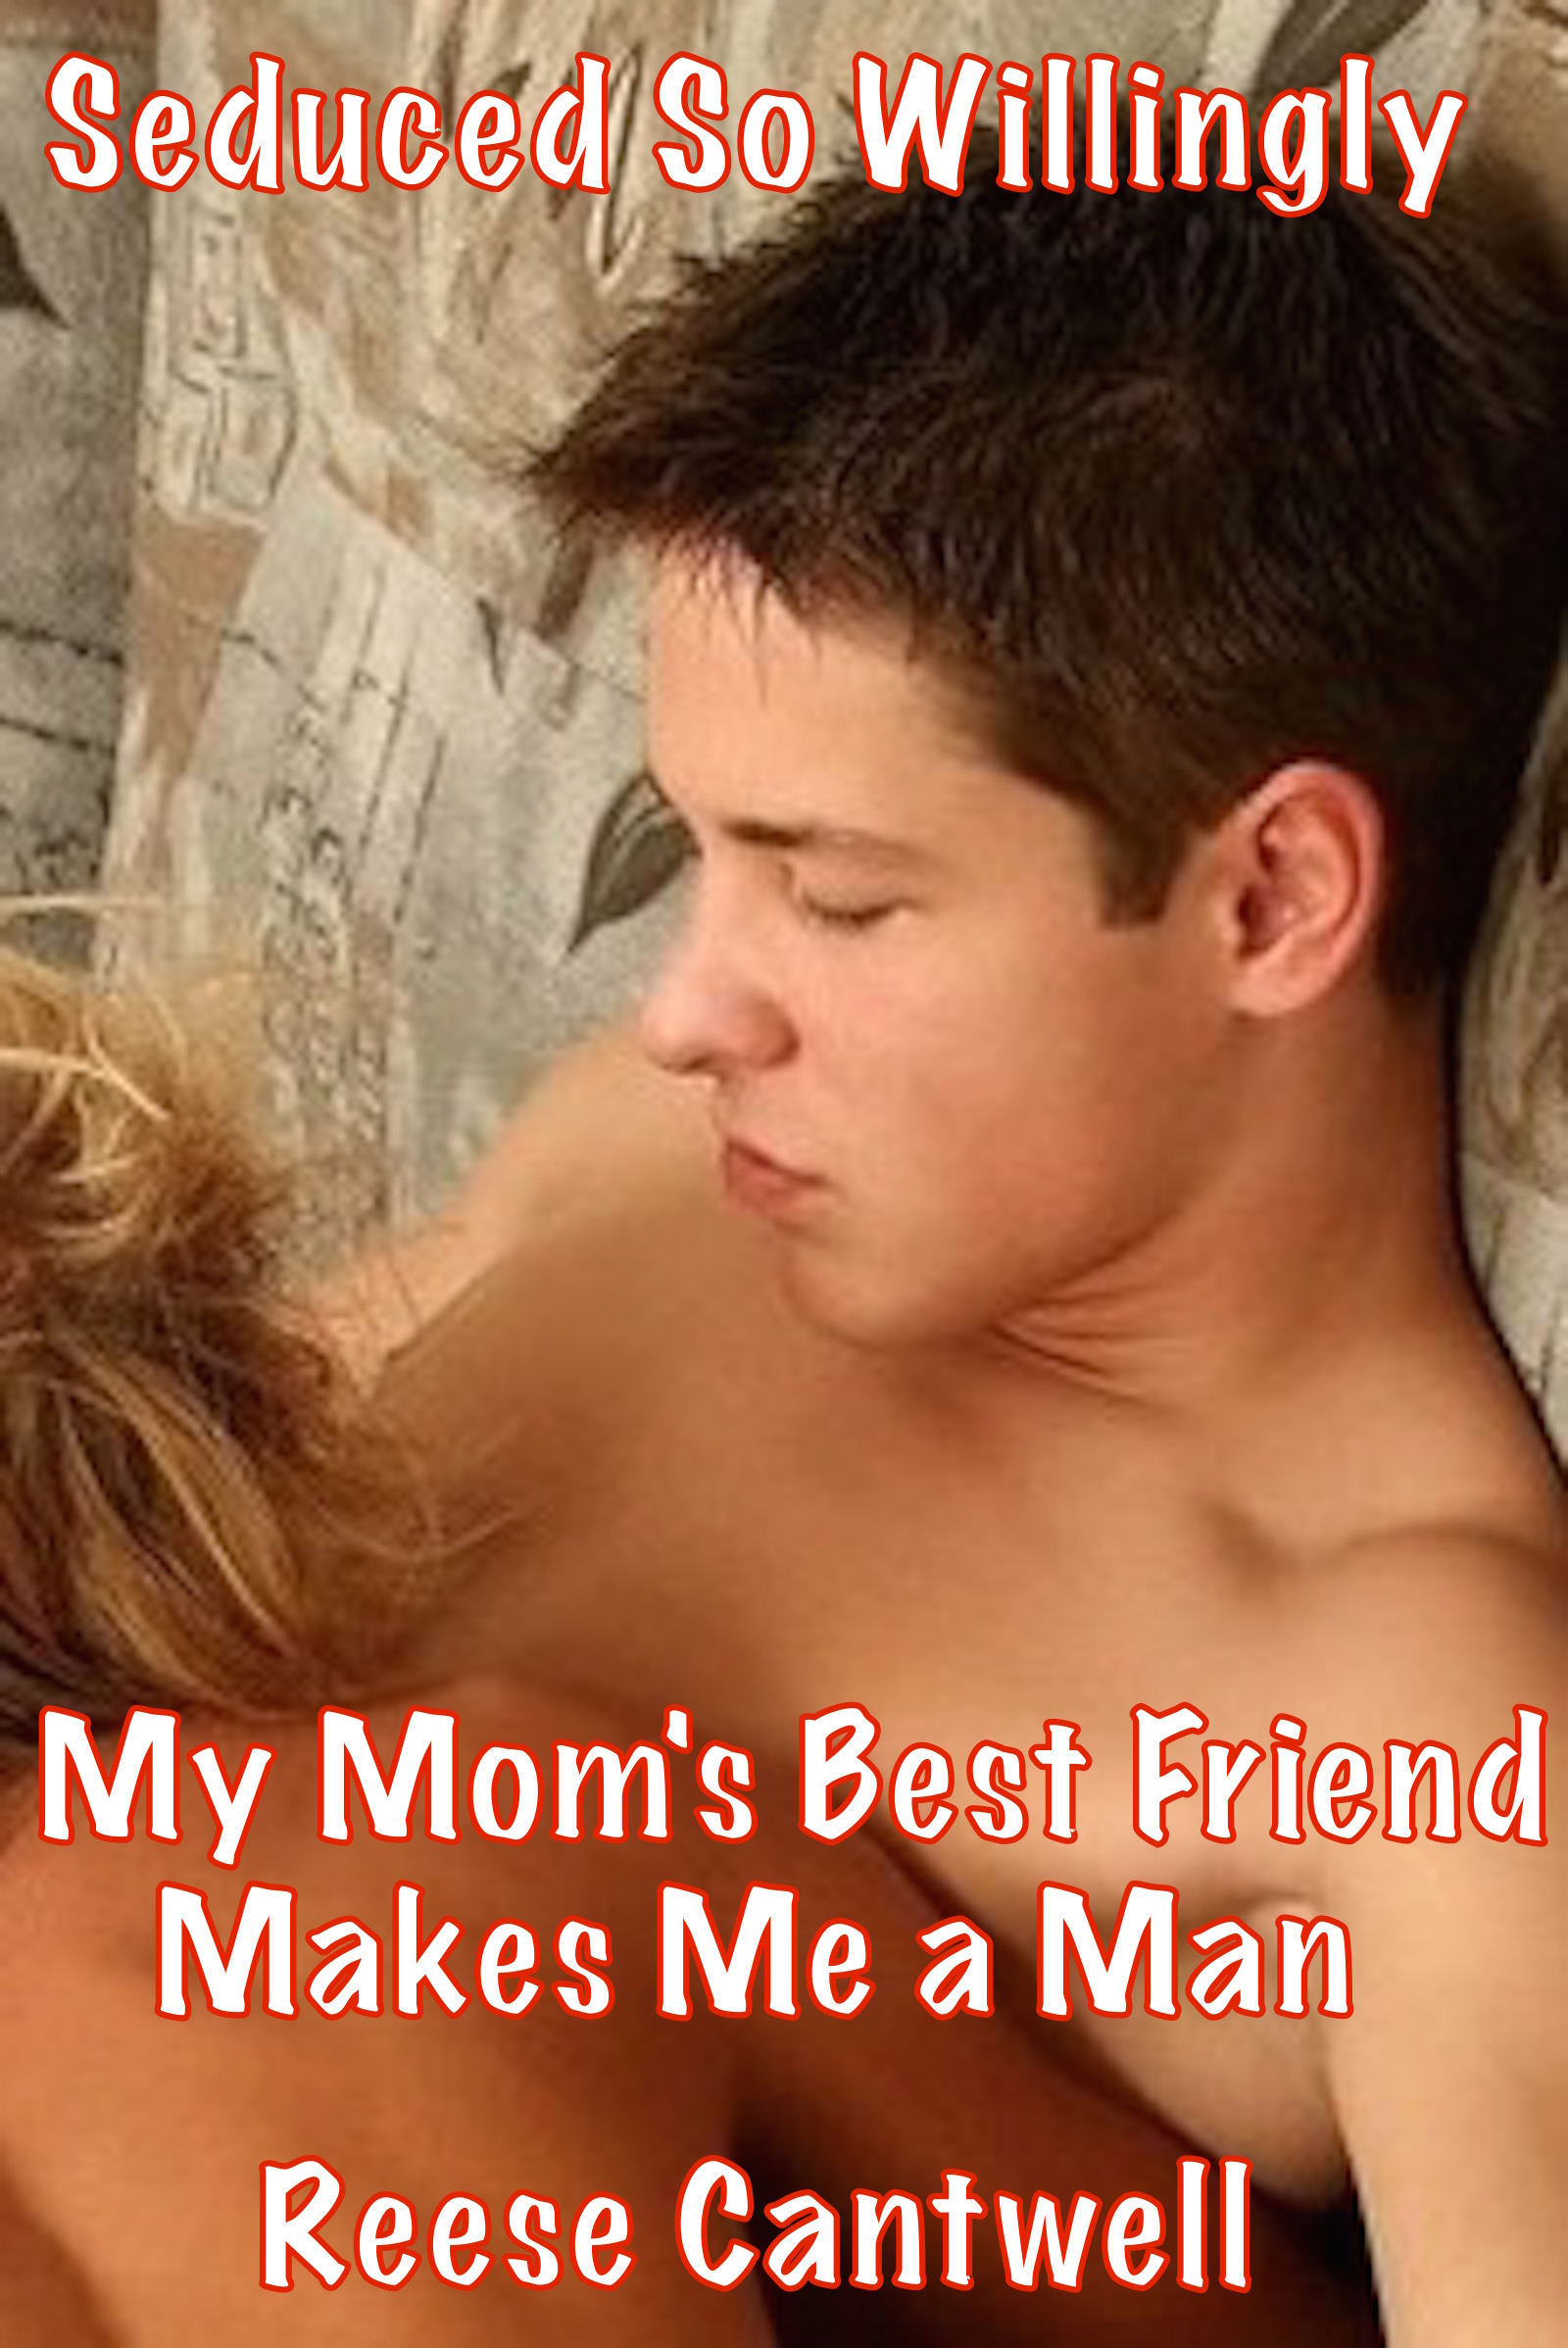 bo reardon recommends seduced by best friends mom pic